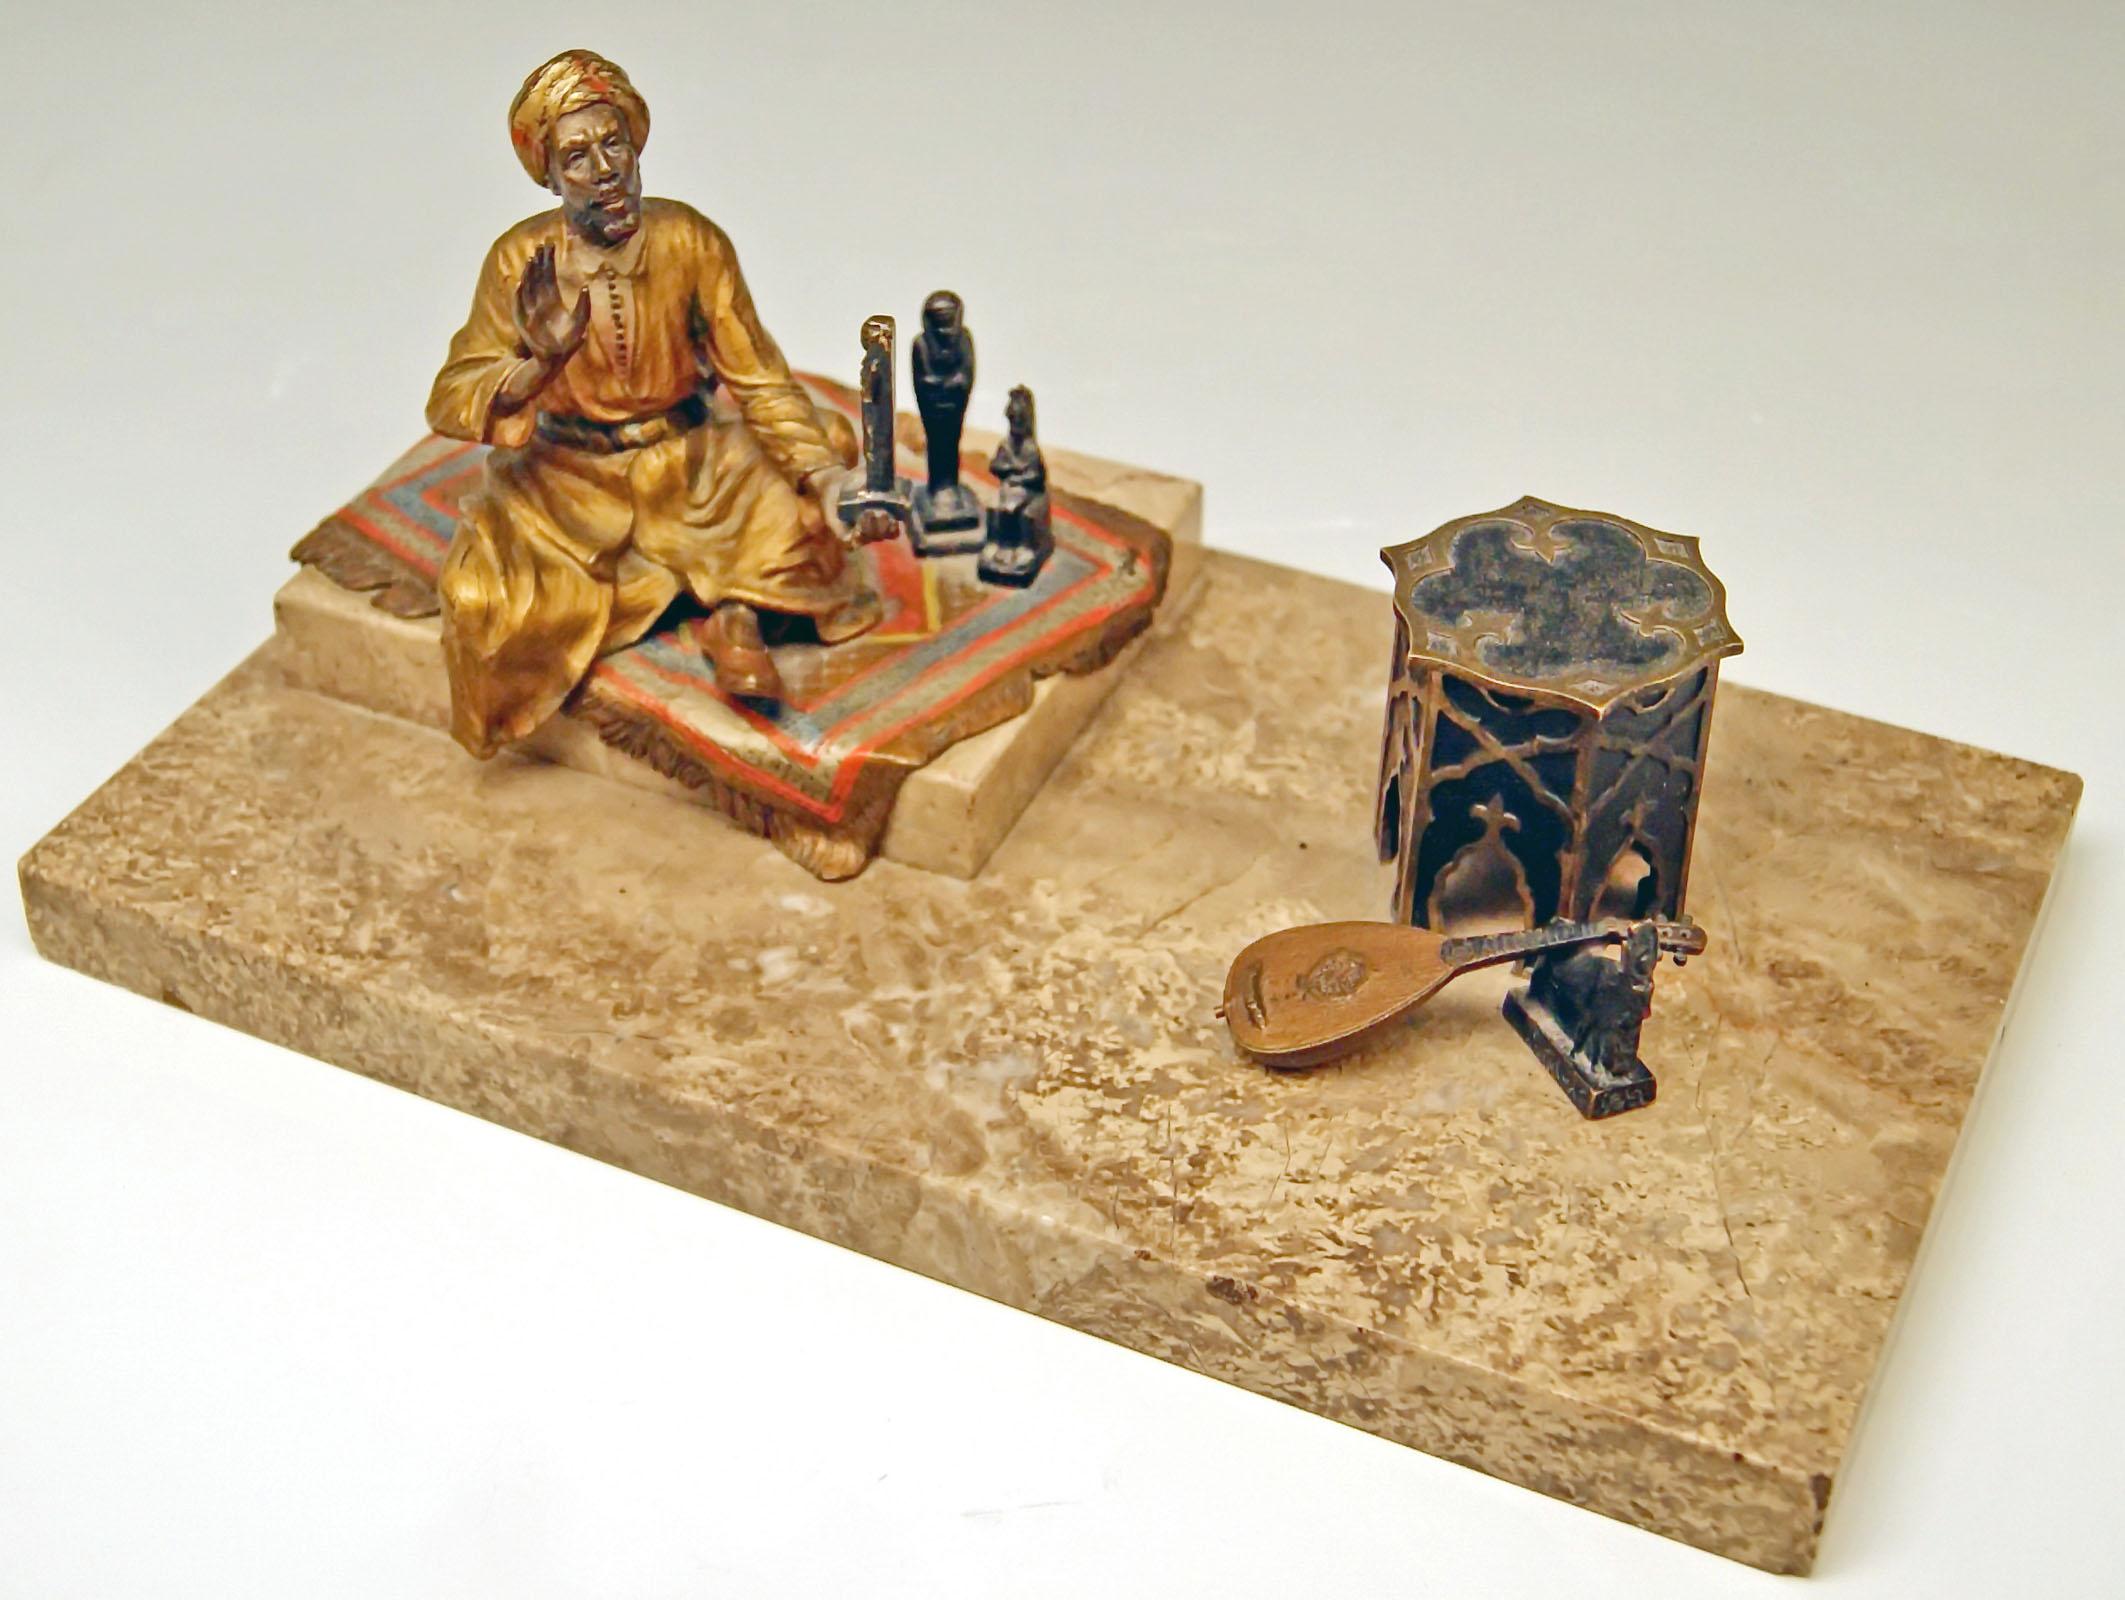 Stunning bronze figurine group: Arab man clad in mantel (fireplace) selling Egypt antiquities.
An Arab man with turban is busy with presenting Egypt figurines to spectator: 
The man has taken place on a carpet which was put on rectangular marble